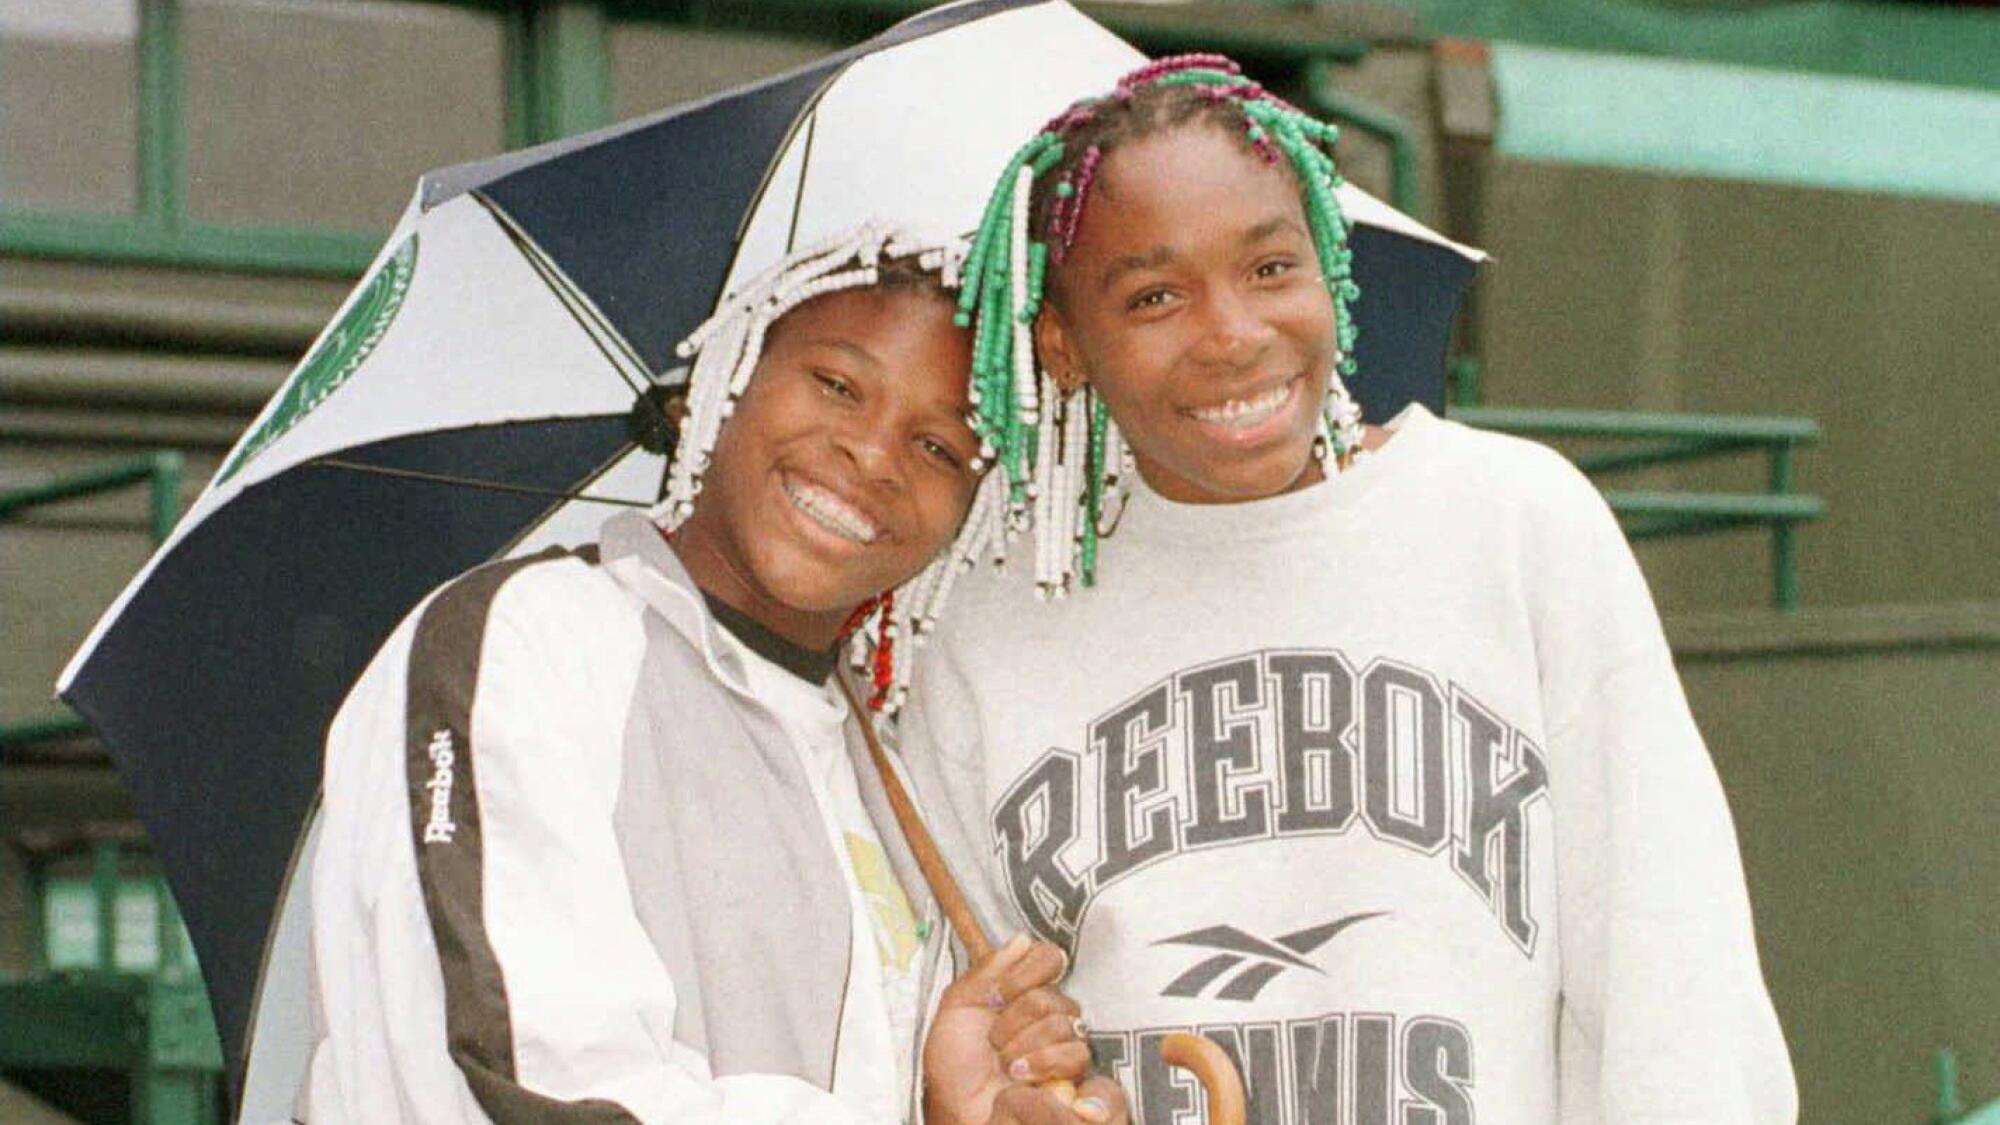 Sisters Serena, left, and Venus Williams wait out a rain delay at Wimbledon in 1997.